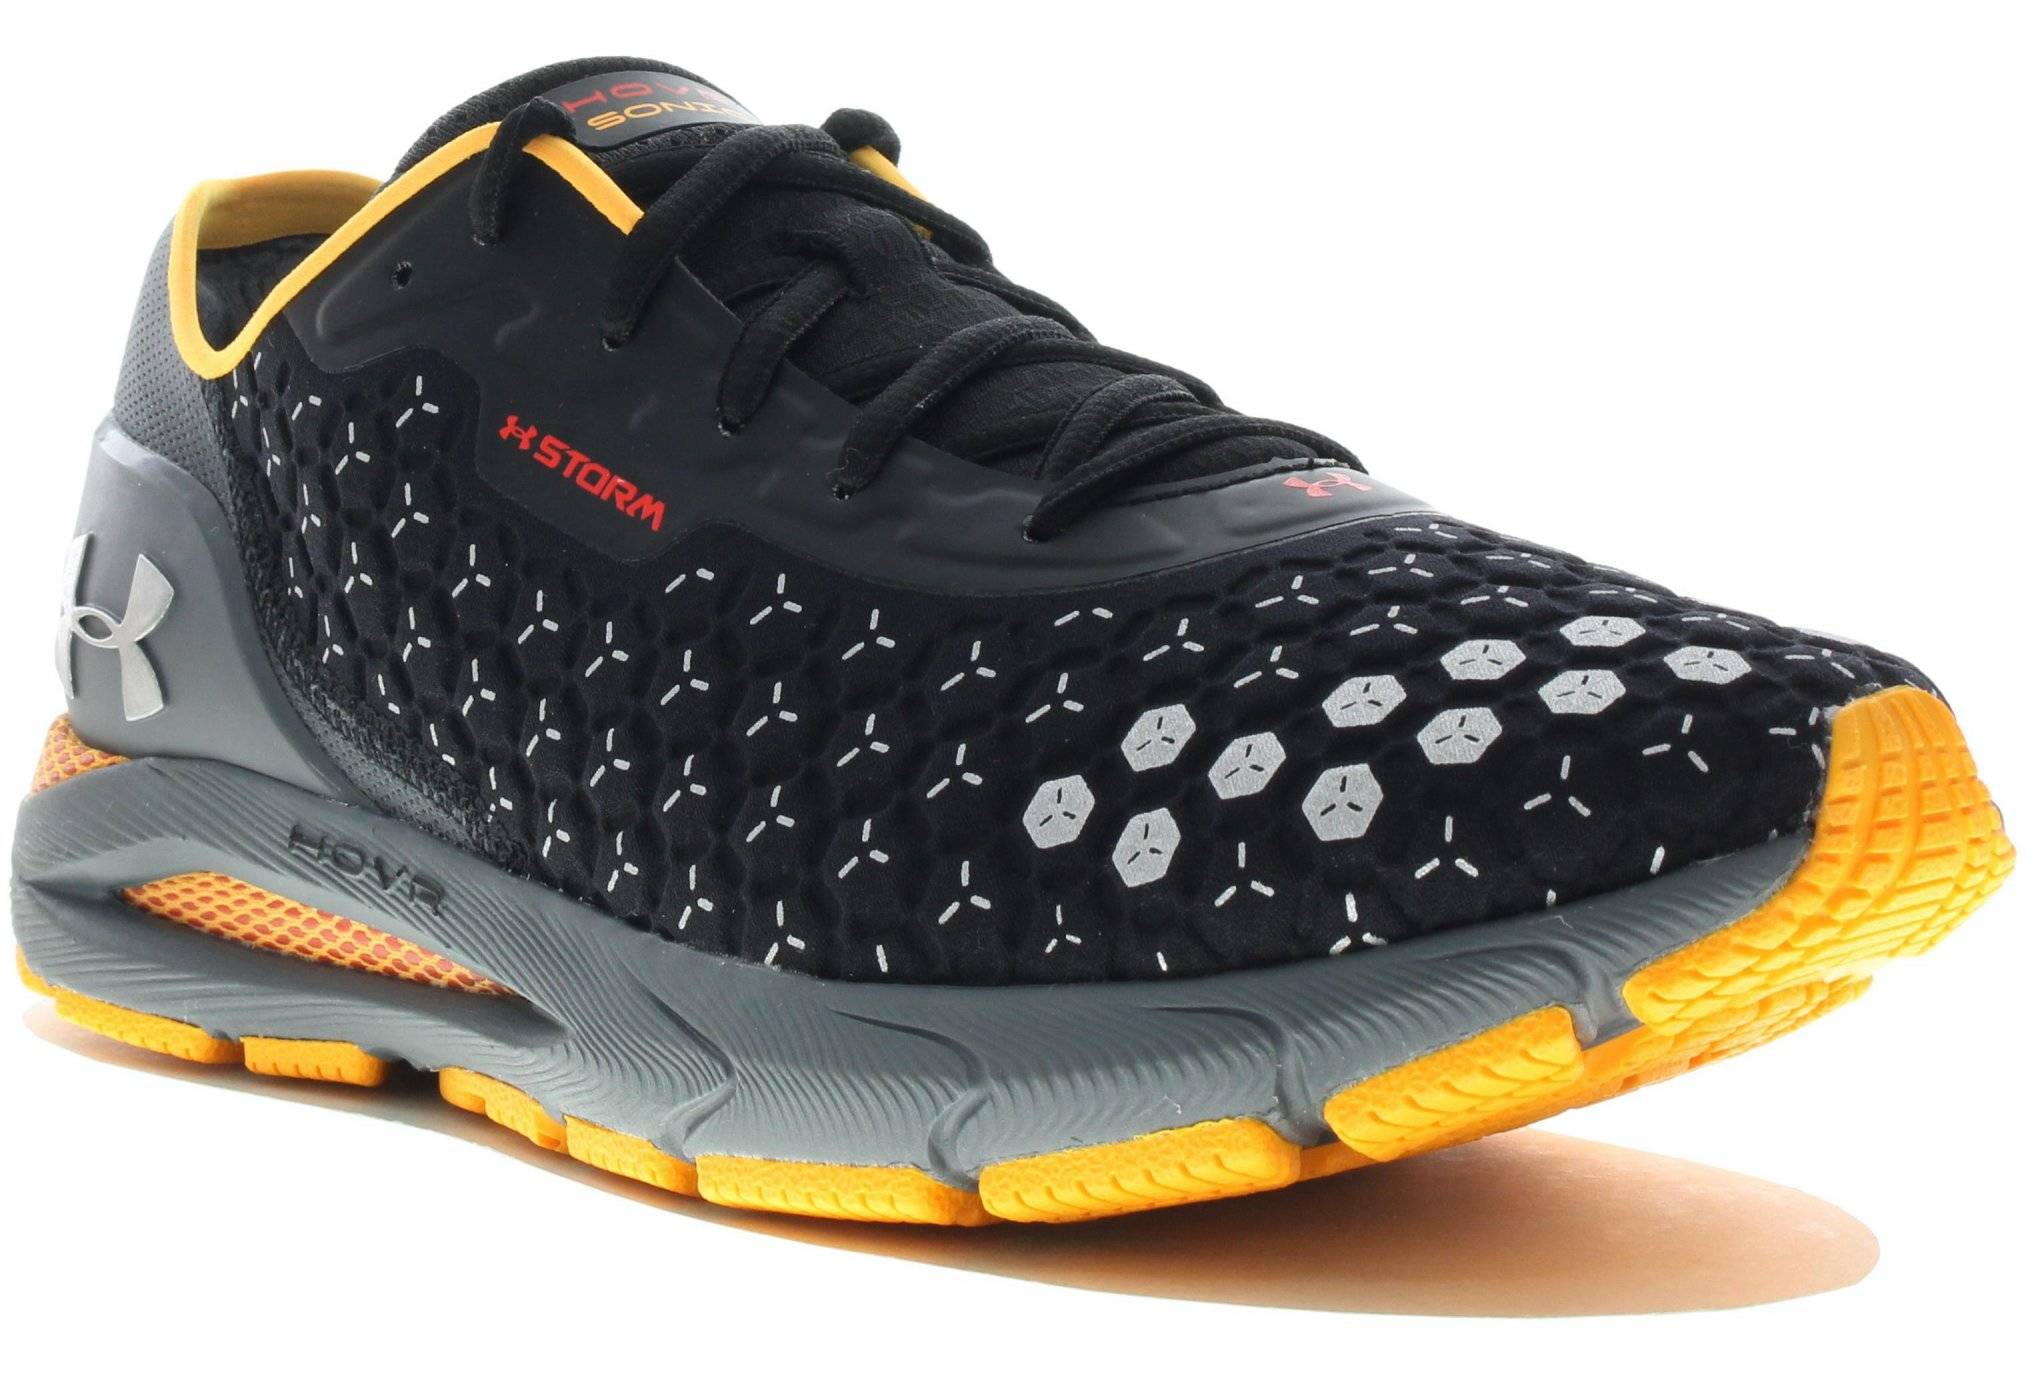 Under Armour HOVR Sonic 3 Storm M 